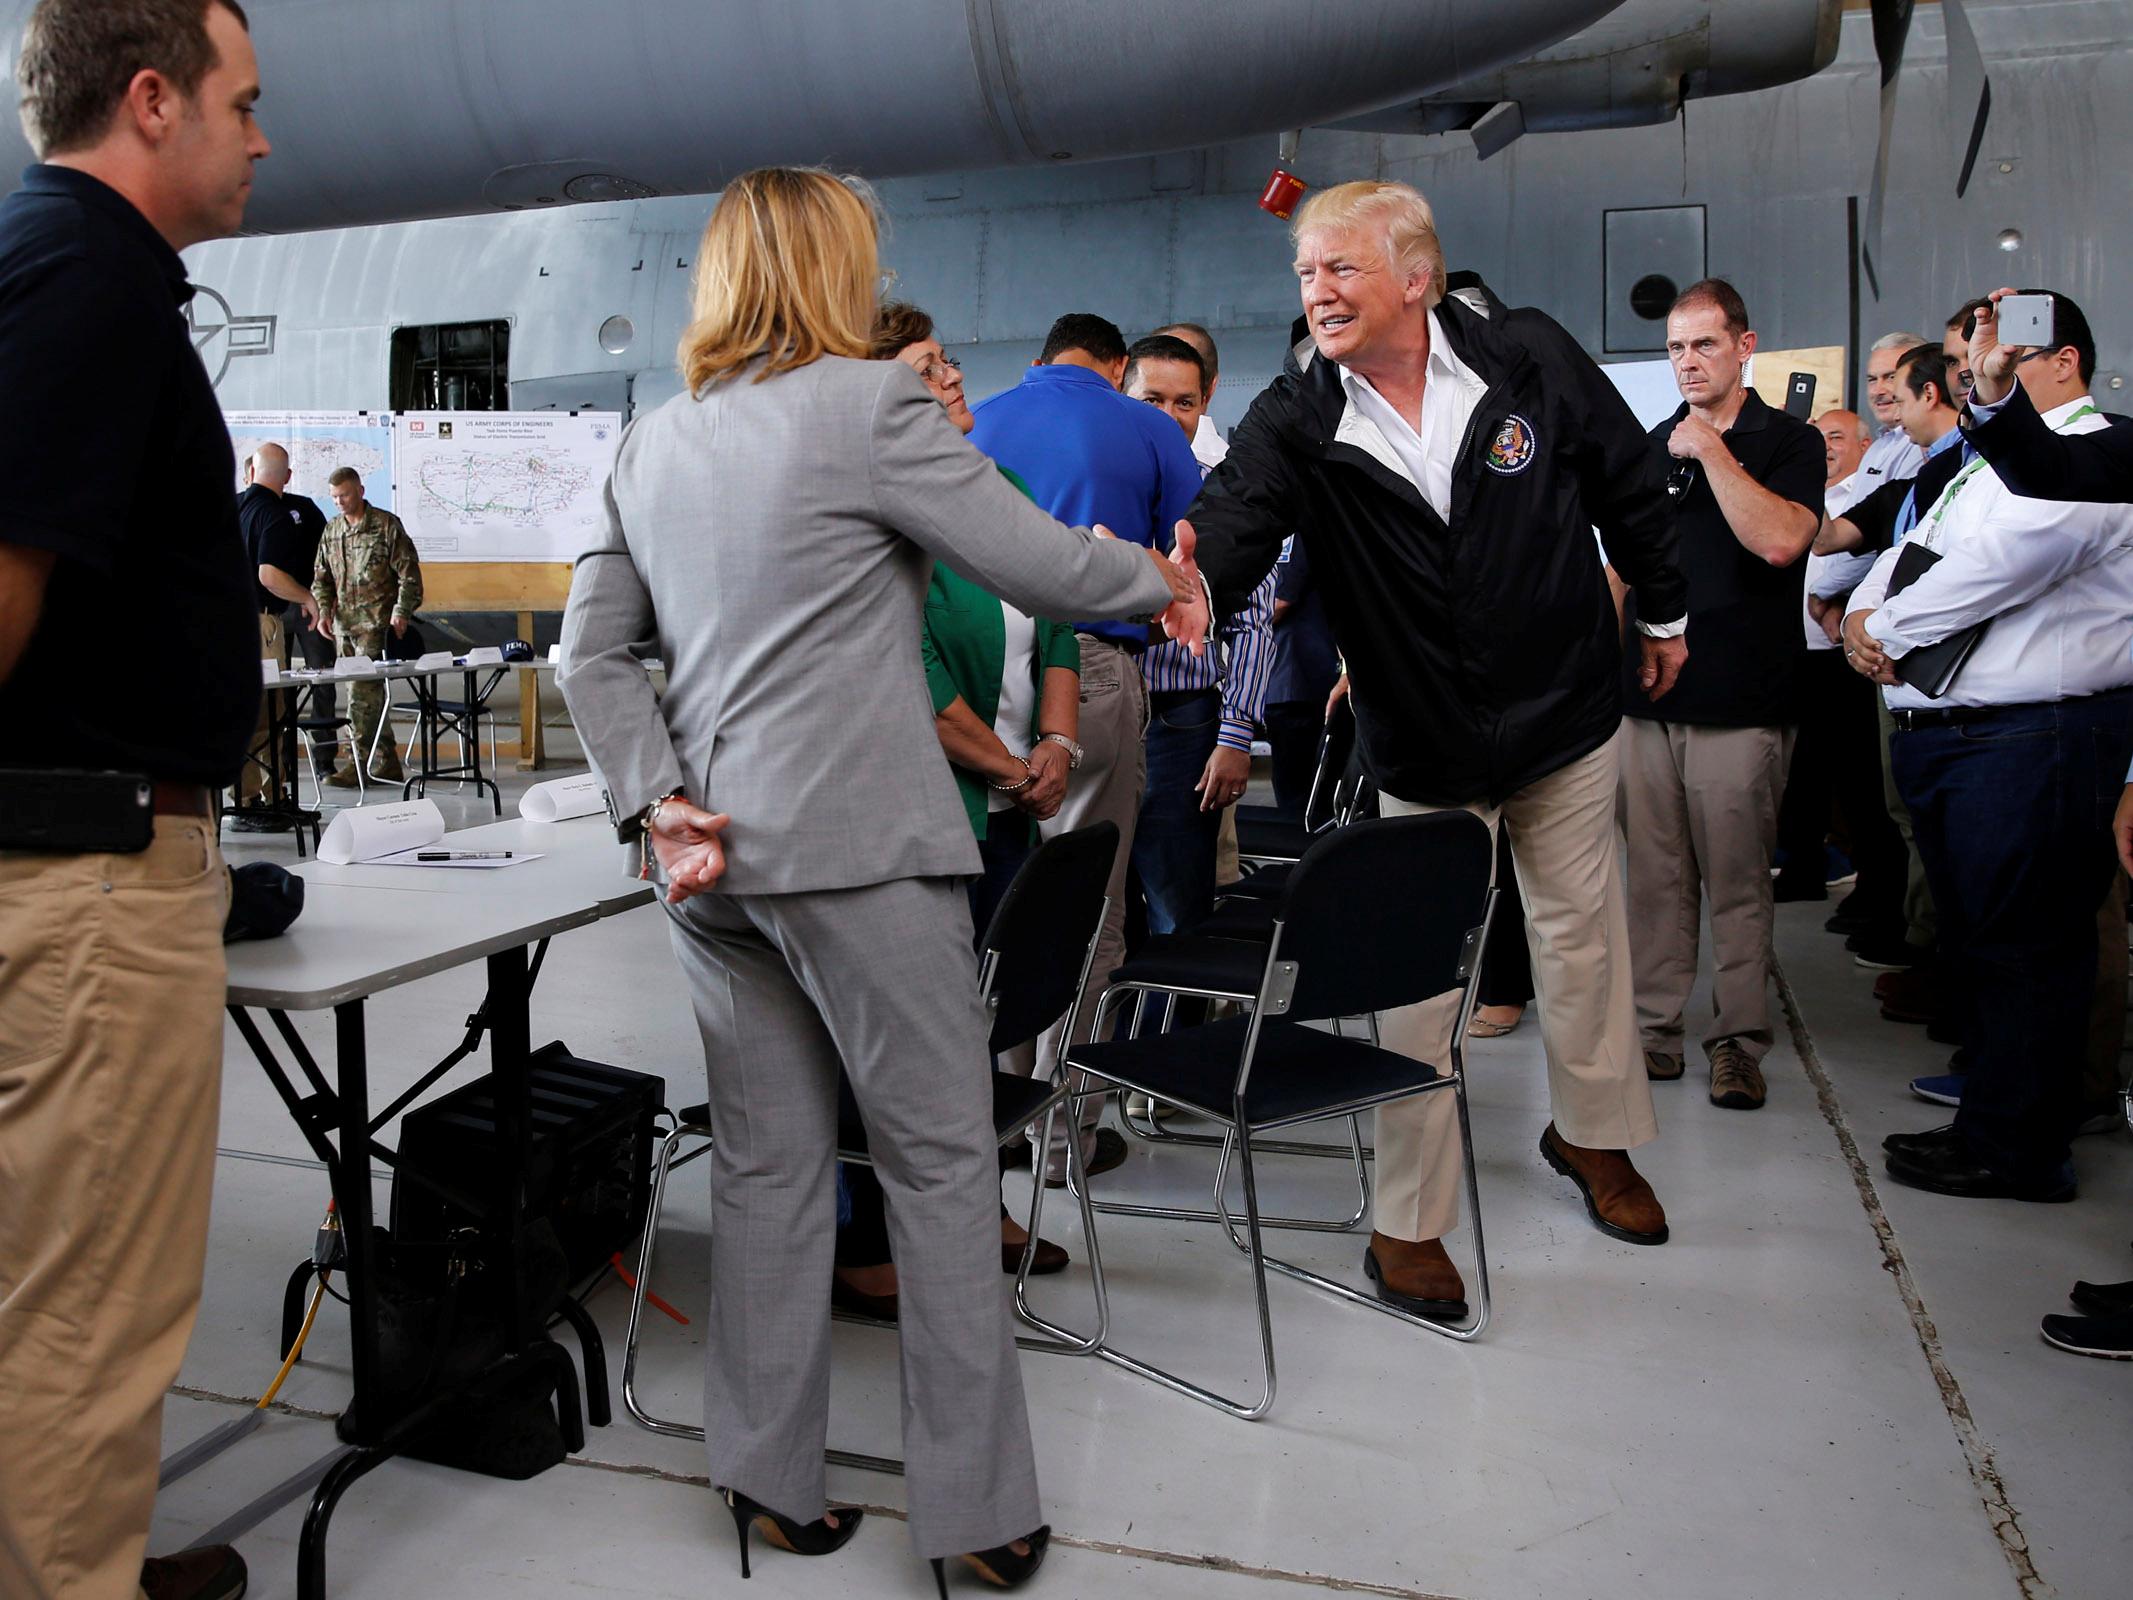 Carmen Yulin Cruz shakes hands with a humbled US President Donald Trump after he criticised her leadership in the the aftermath of Hurricane Maria